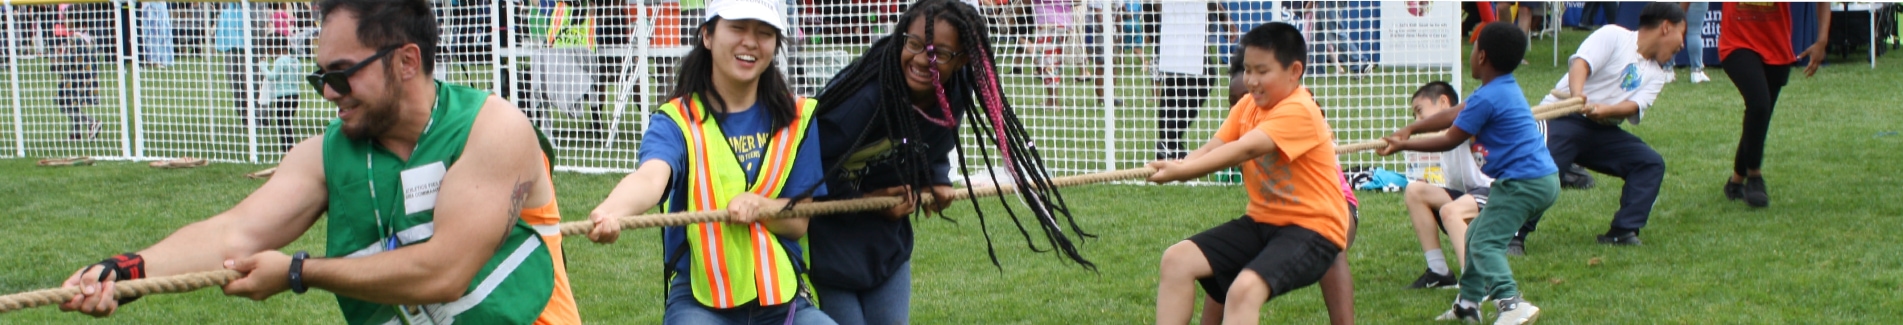 Parks and Recreation employees and children pulling a rope in tug of war in Rainier Playfield